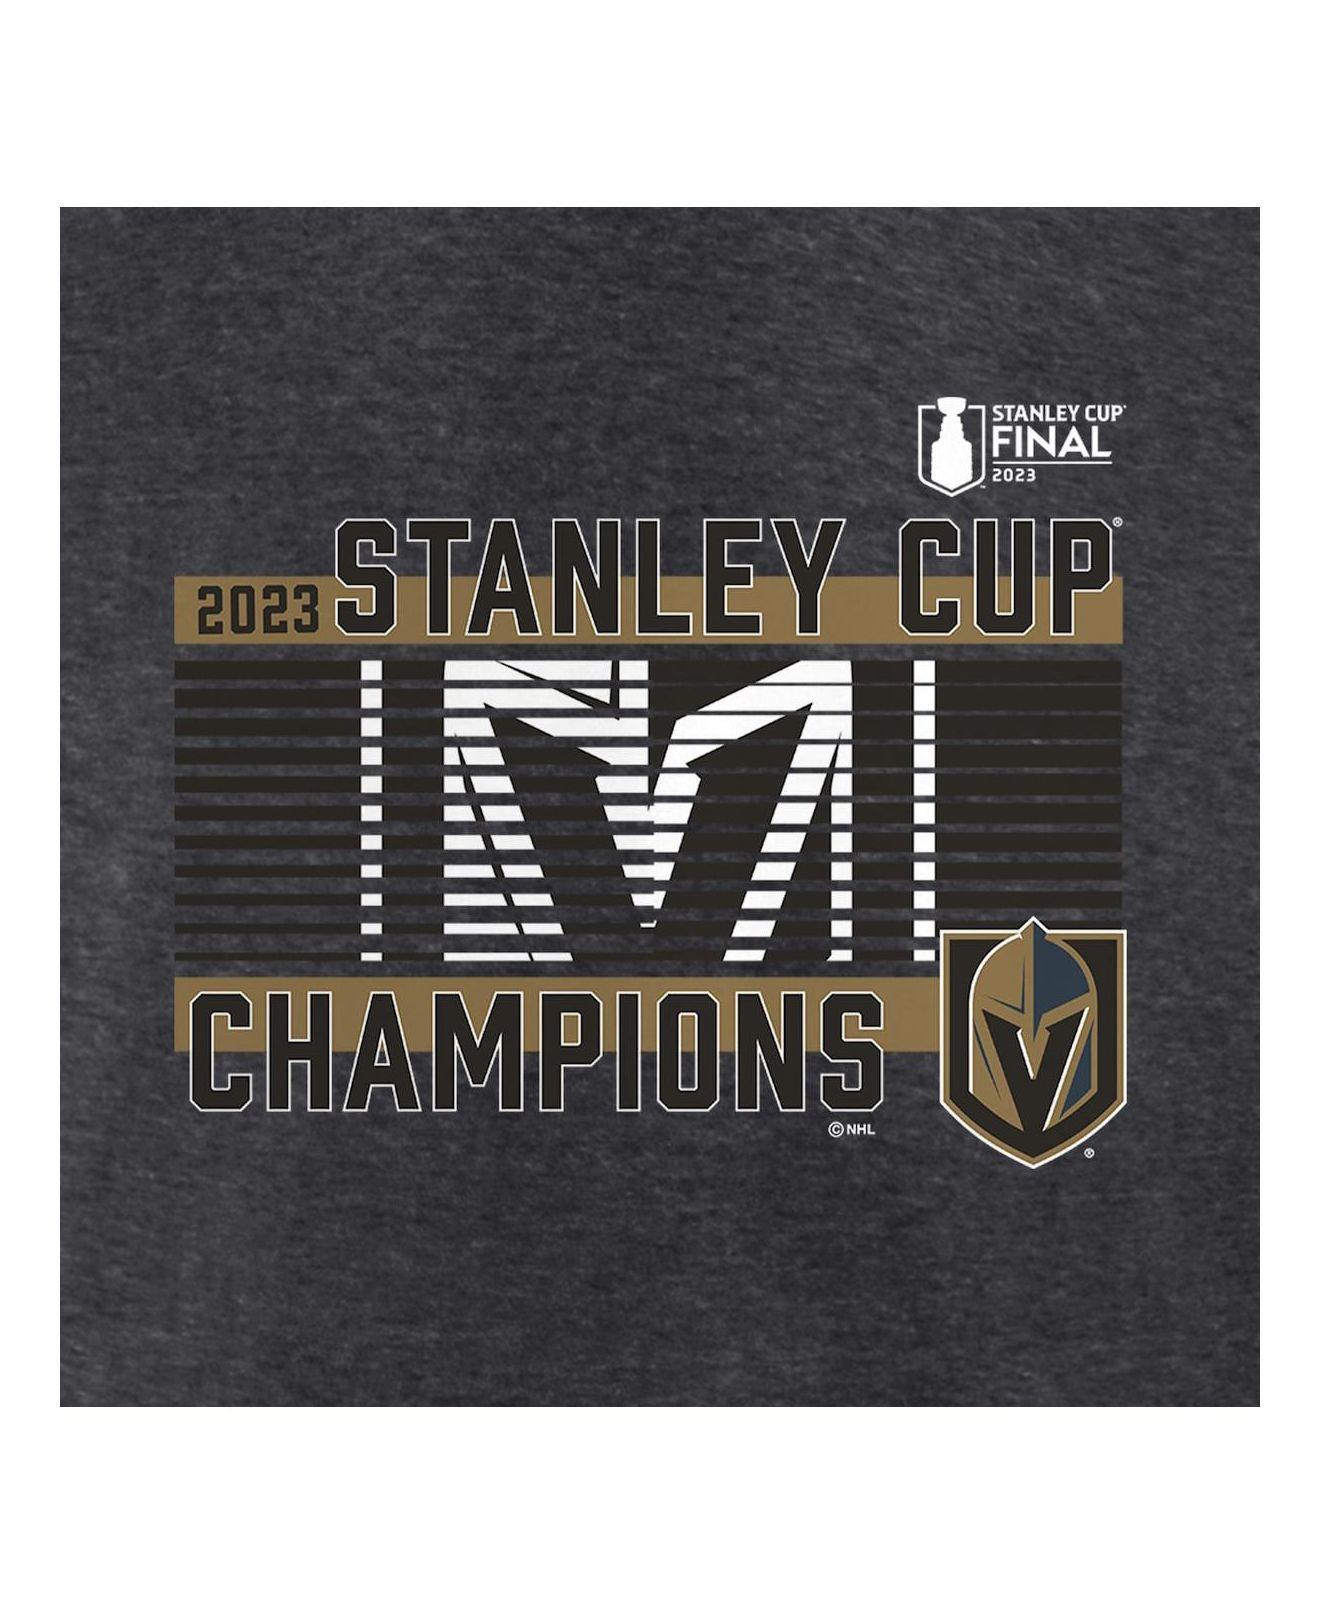 Vegas Golden Knights Fanatics Branded 2023 Stanley Cup Champions